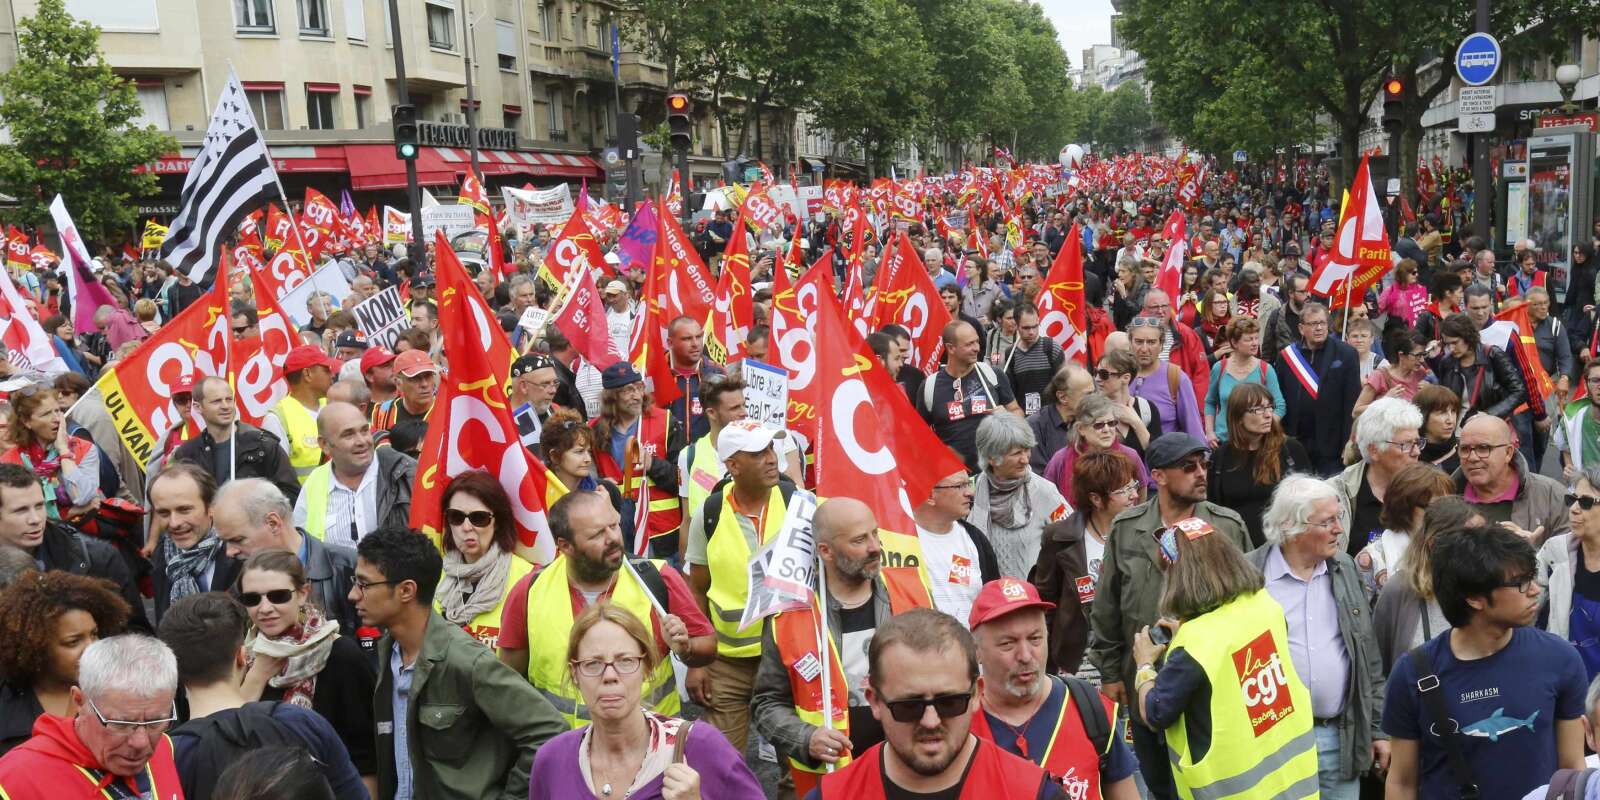 French CGT labour union employees march during a demonstration in Paris as part of nationwide protests against plans to reform French labour laws, France, June 14, 2016. REUTERS/Jacky Naegelen